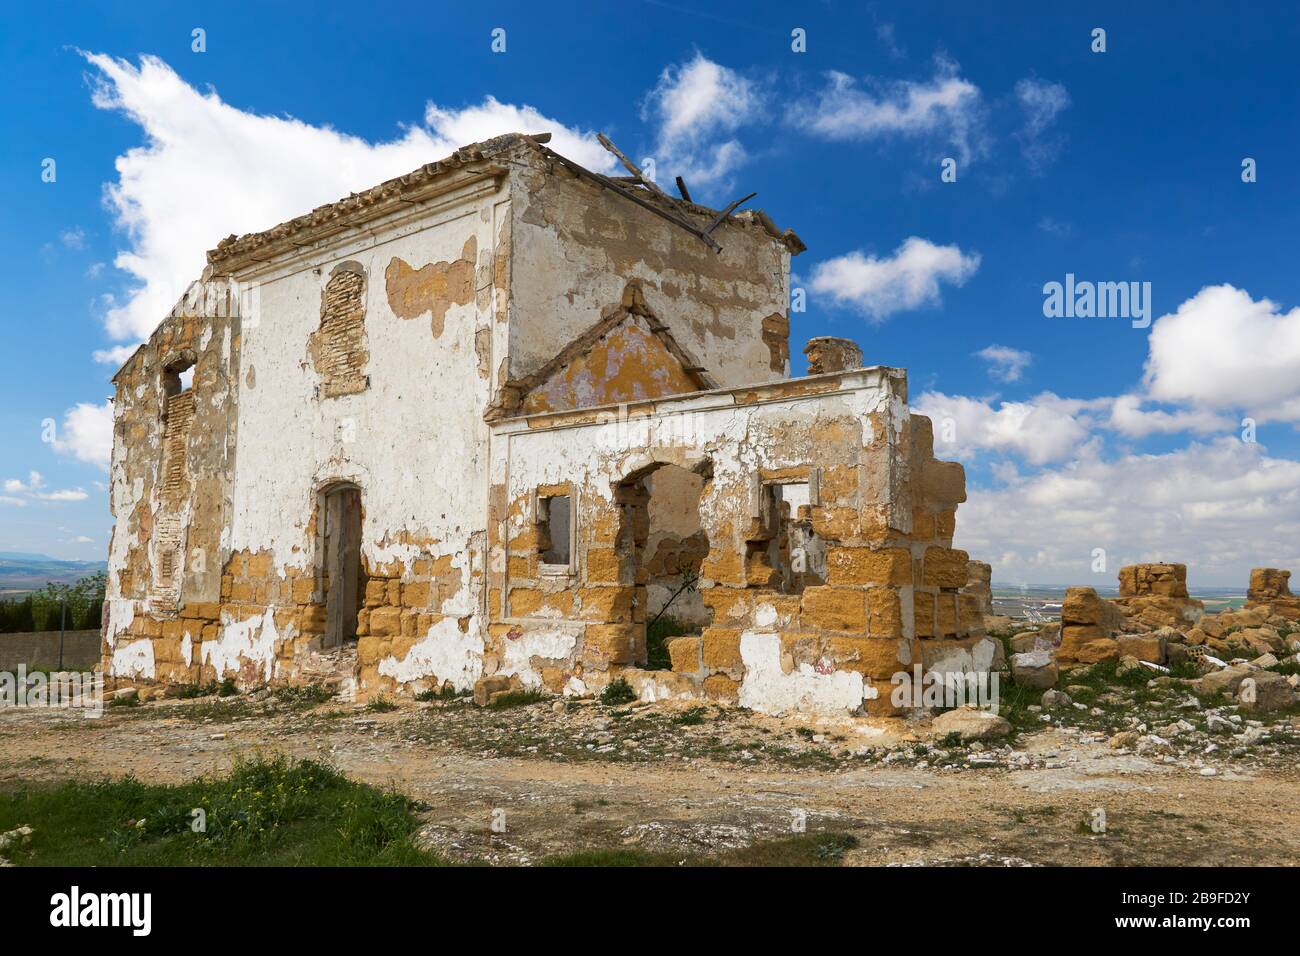 Abandoned house in the town of Osuna, Seville. Spain Stock Photo